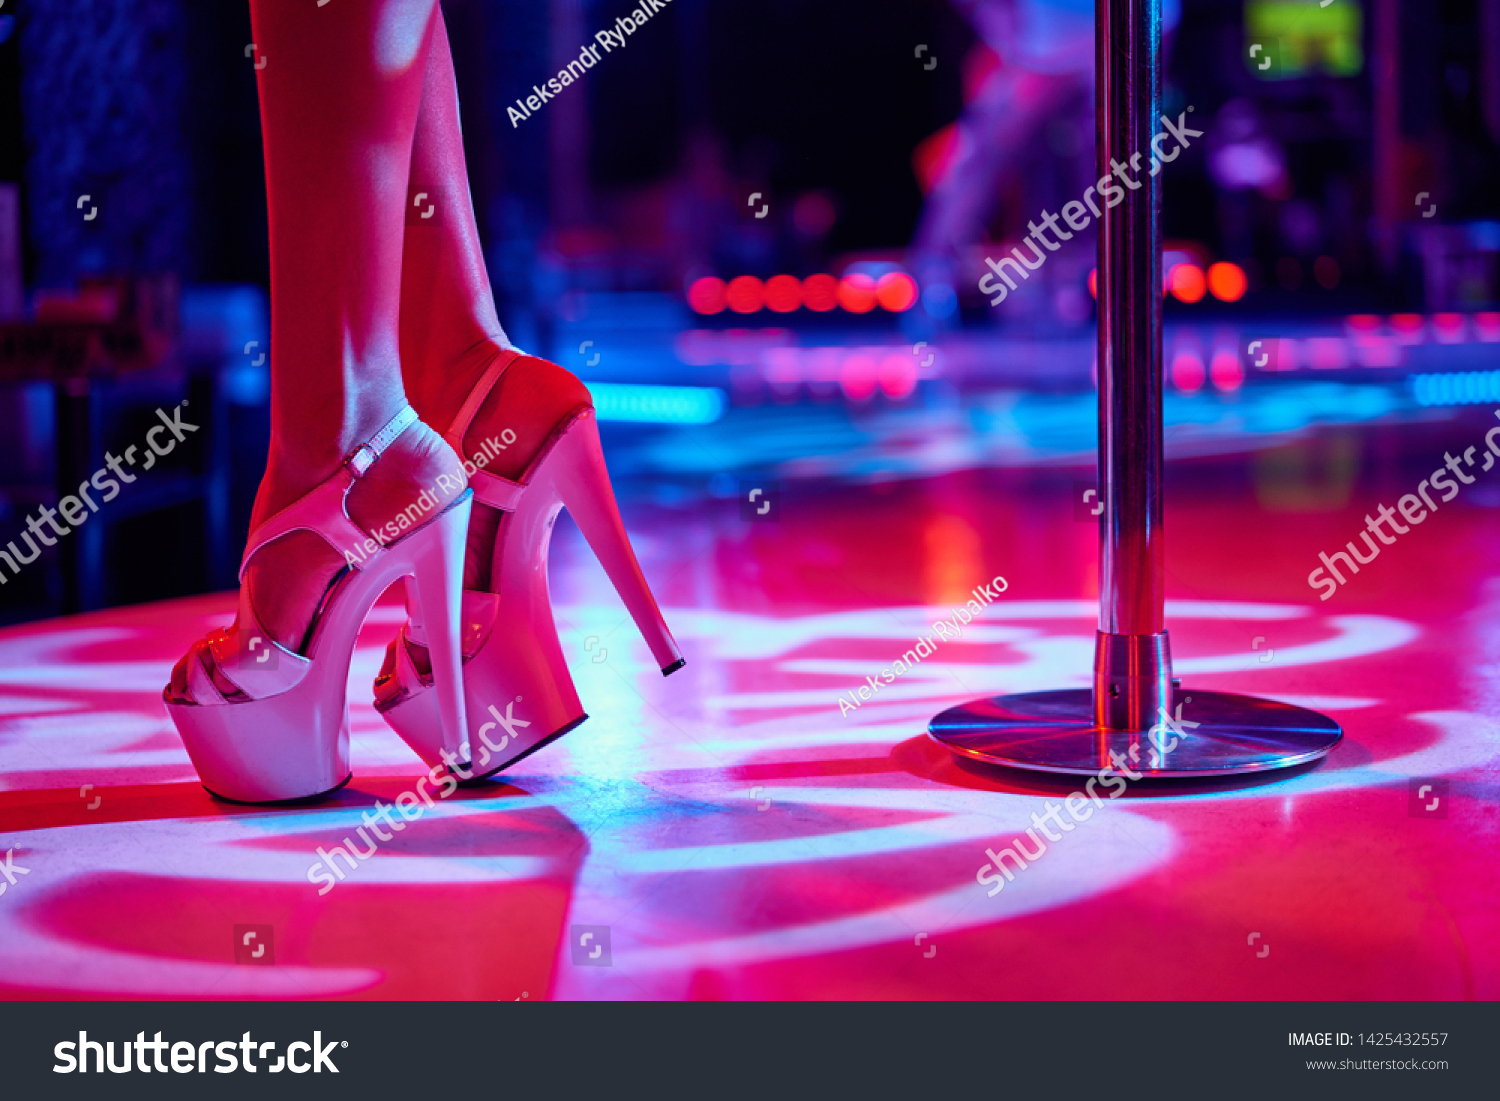 Young Sexy Girl Strip Club Luring Foto Stok 1425432557 Shutterstock 